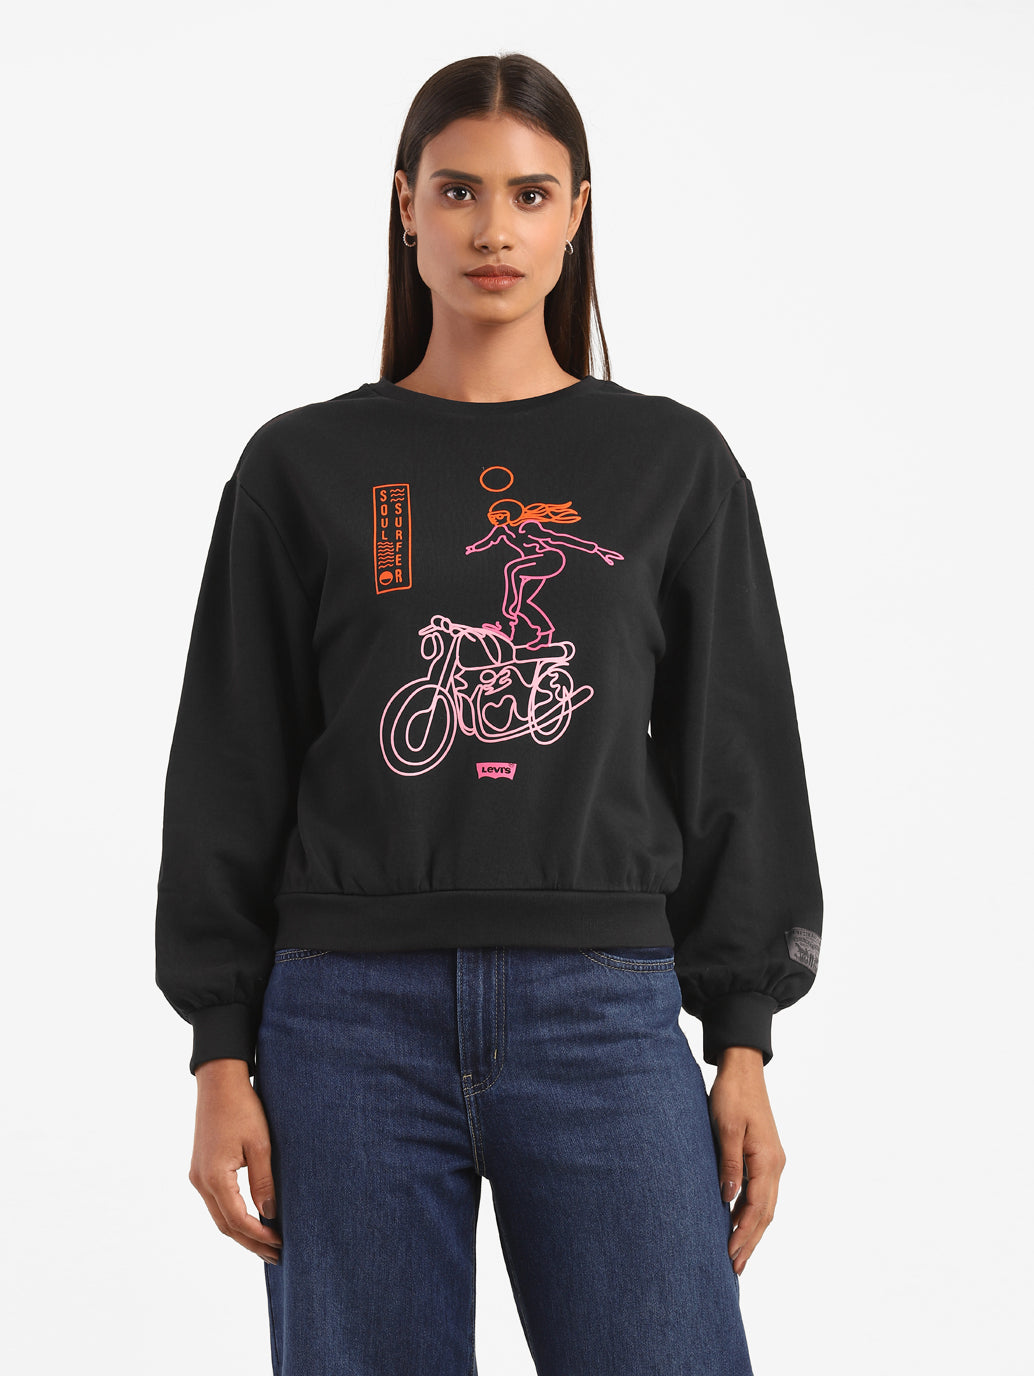 Graphic Sweatshirt From The Levi's Motorcycle Collection